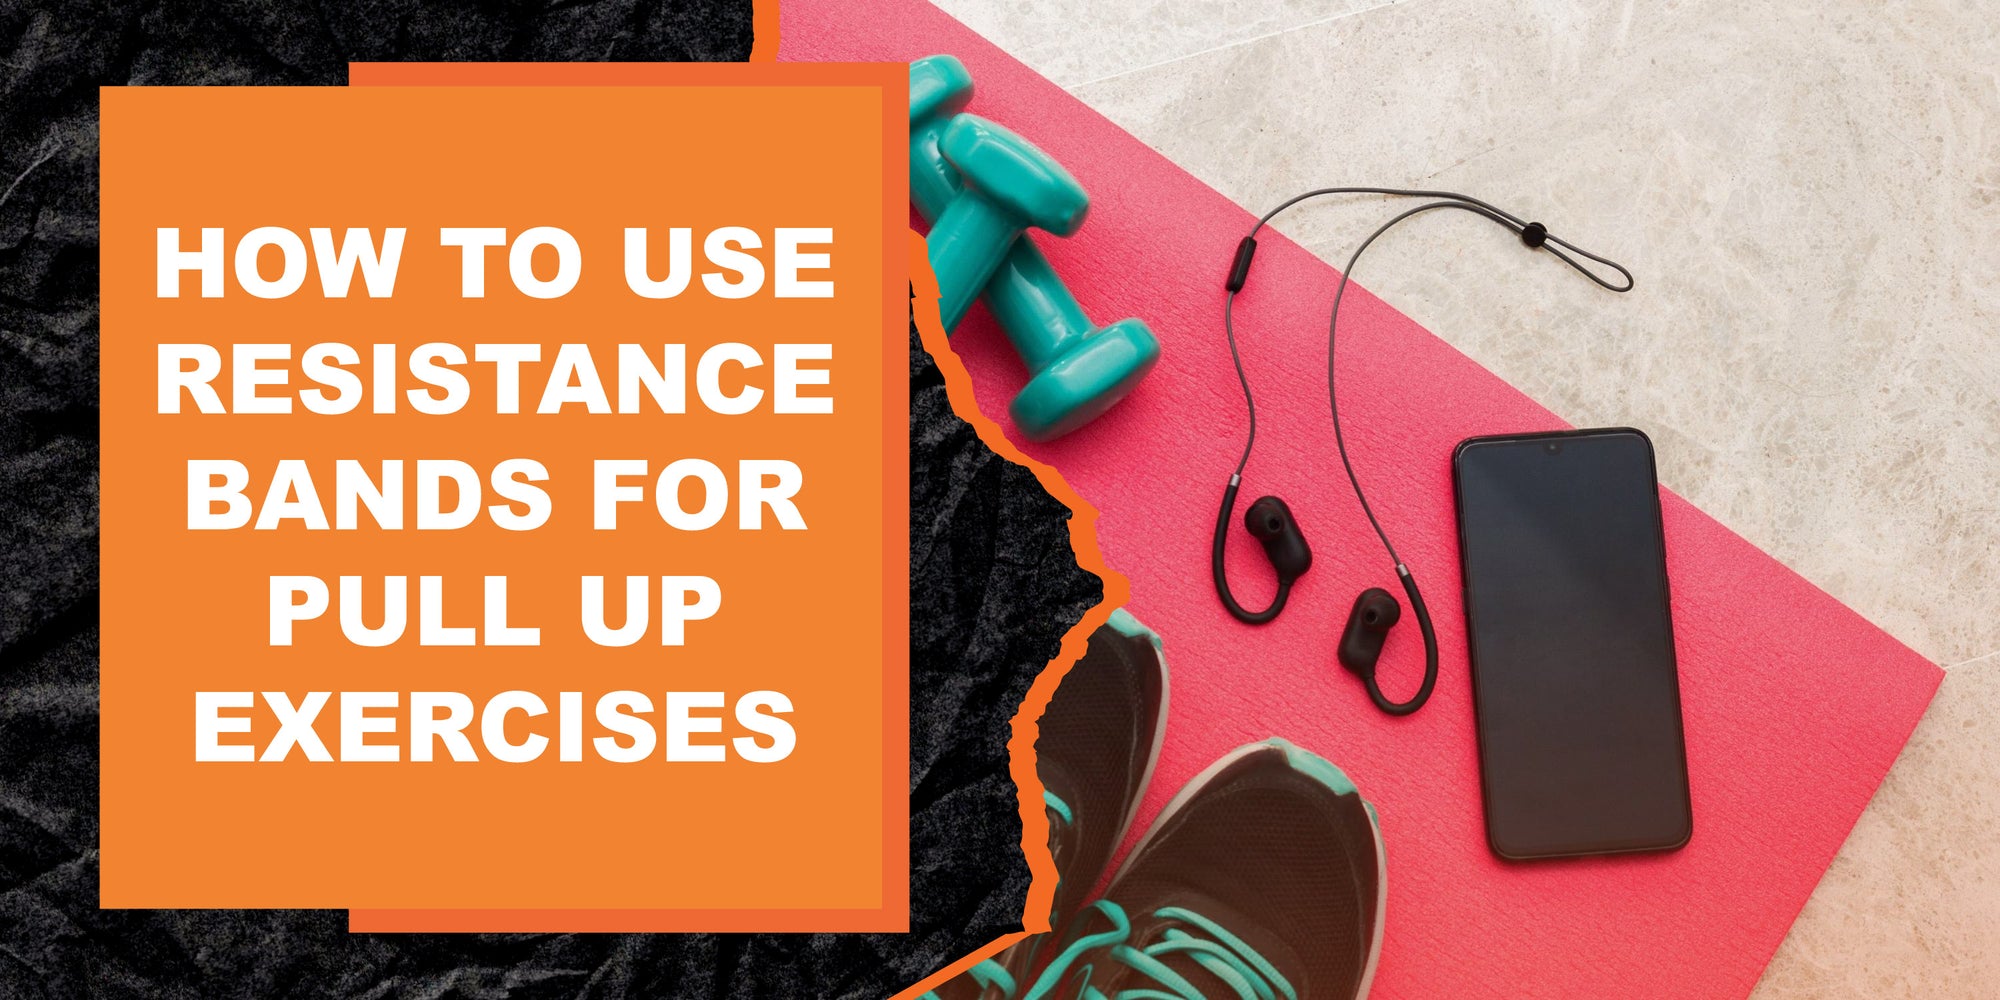 How to Use Resistance Bands for Pull Up Exercises